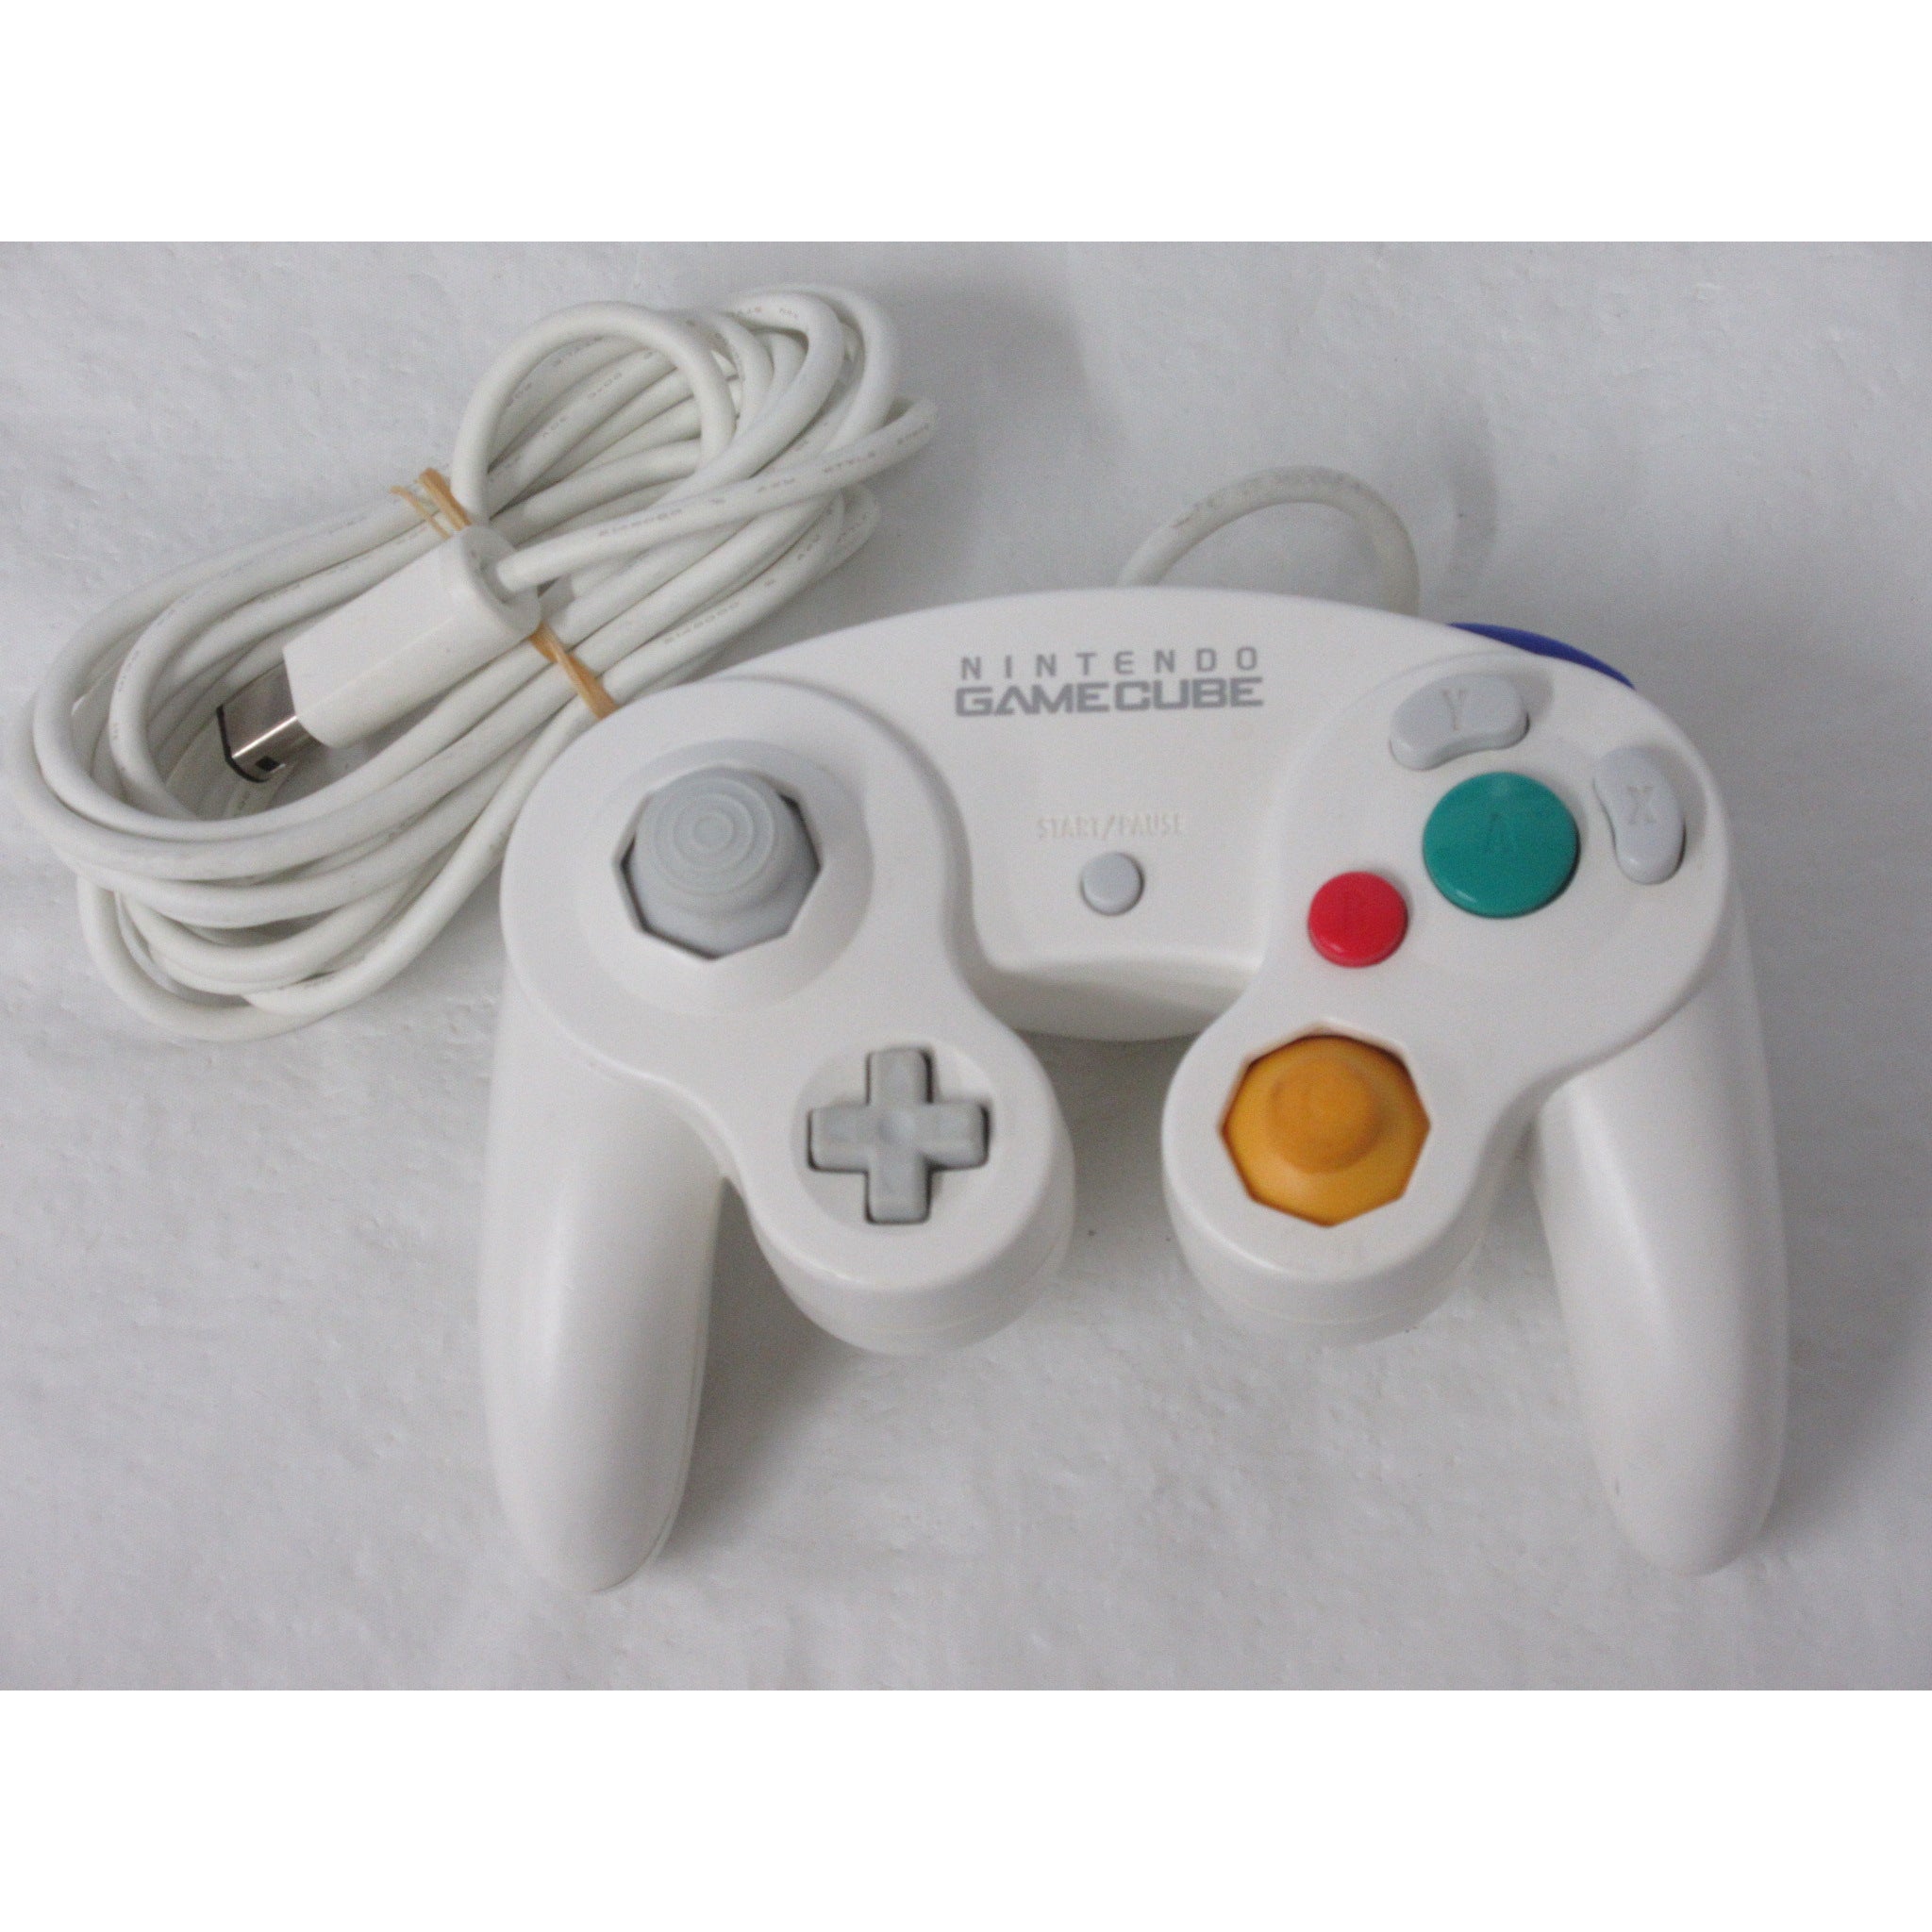 Nintendo GameCube Official Controller White DOL-003 Japan GC [Used 